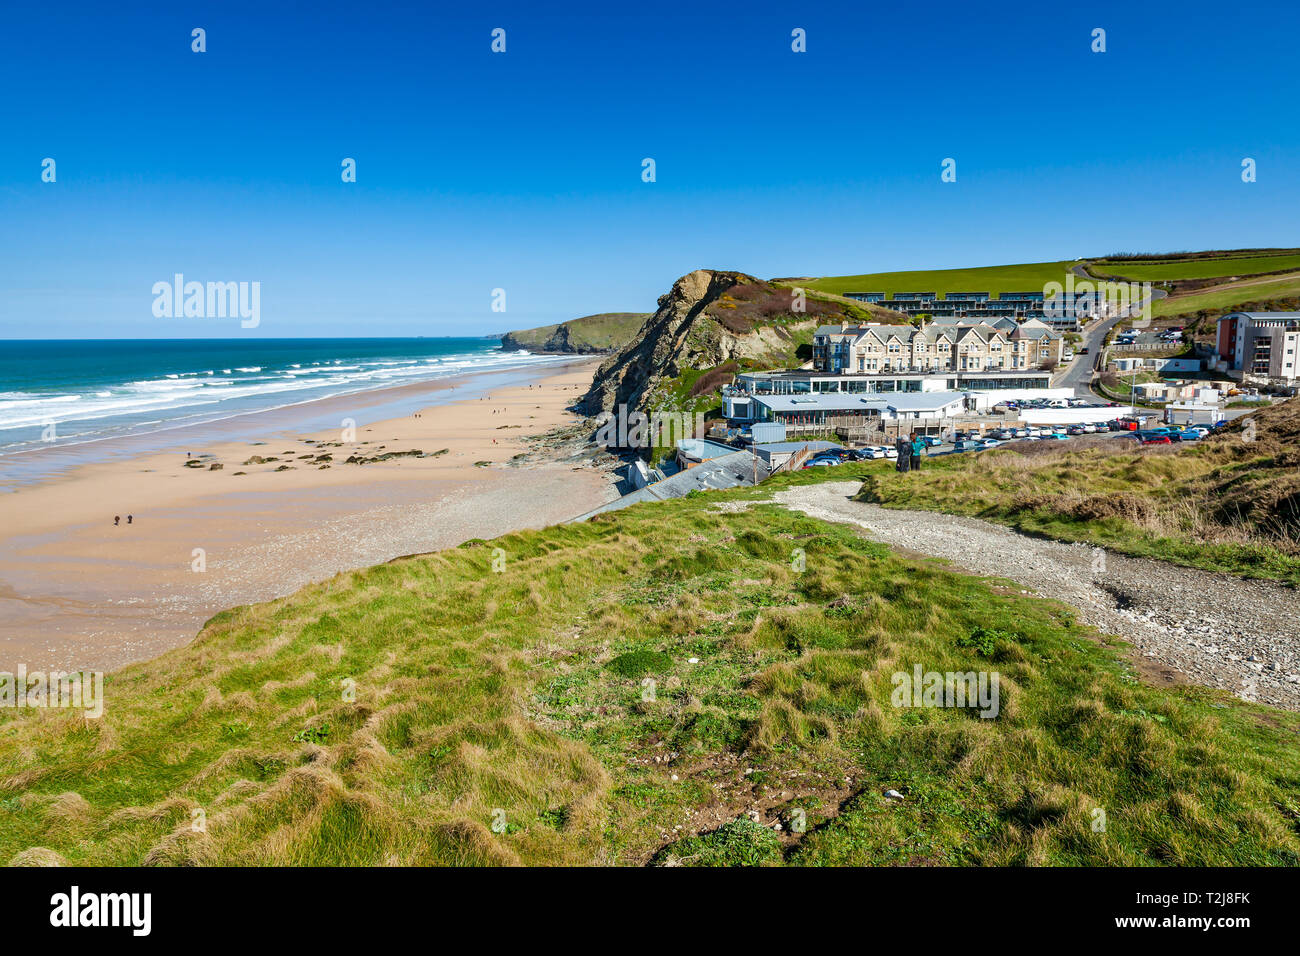 On the coast path overlooking the golden sandy beach at Watergate Bay near Newquay Cornwall England UK Europe Stock Photo